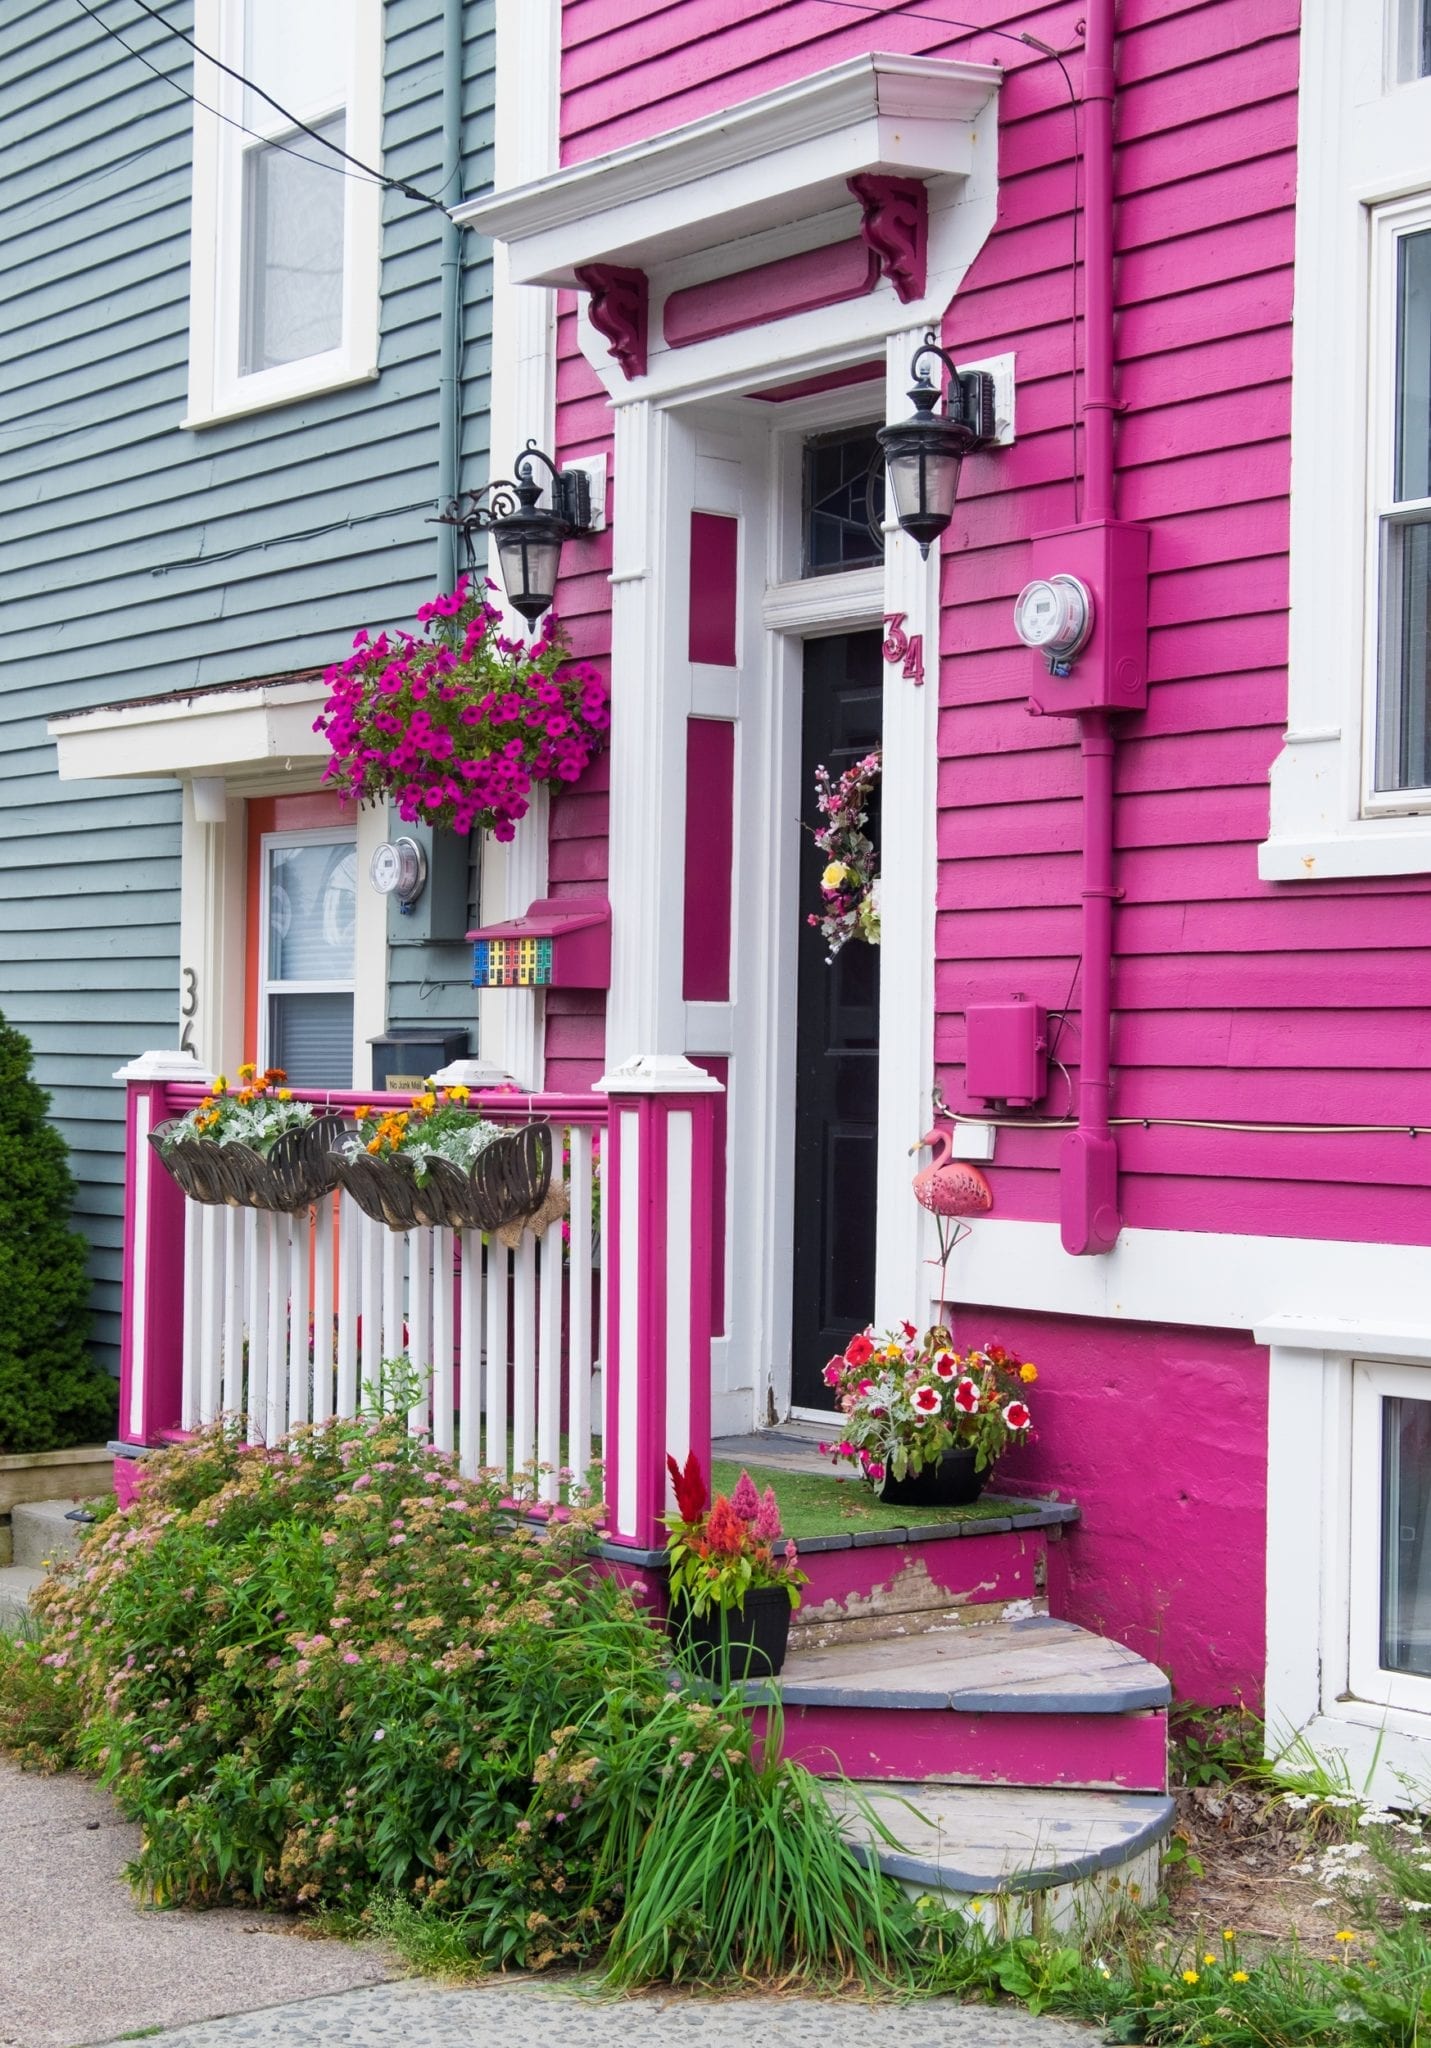 A bright pink house with a tiny porch and bushes and pink plants hanging, in St. John's, Newfoundland.